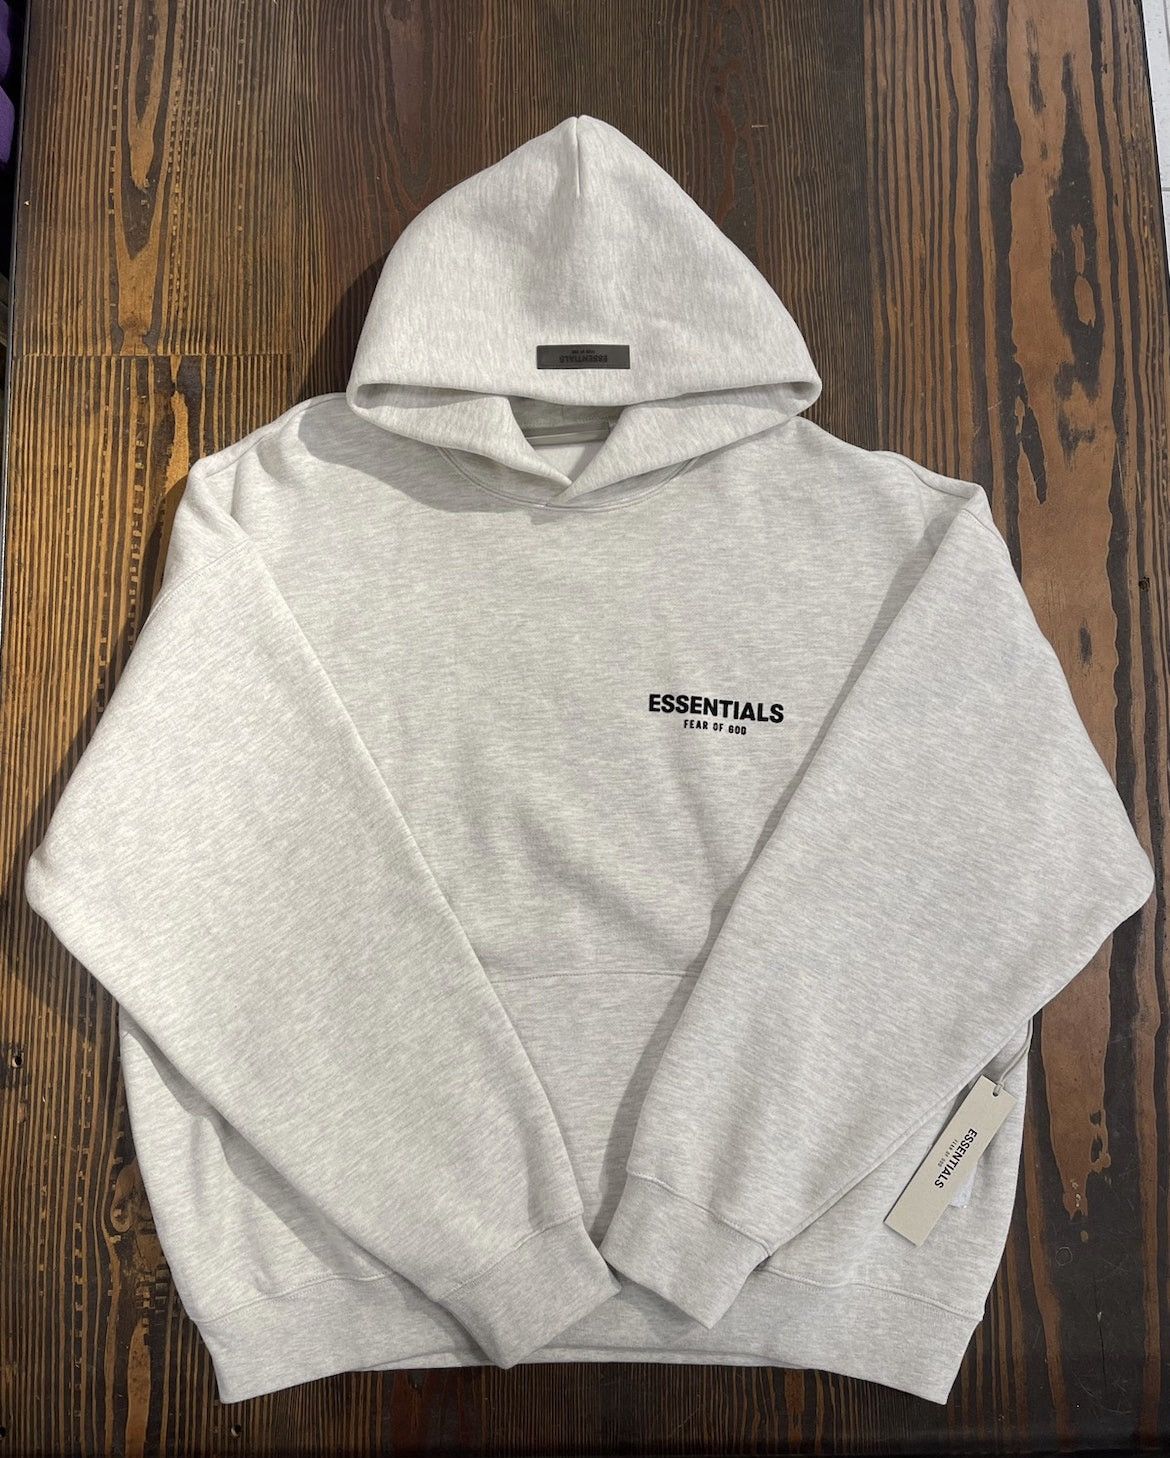 Pacsun FOG - Essentials Fear Of God Hoodie Size Large Light